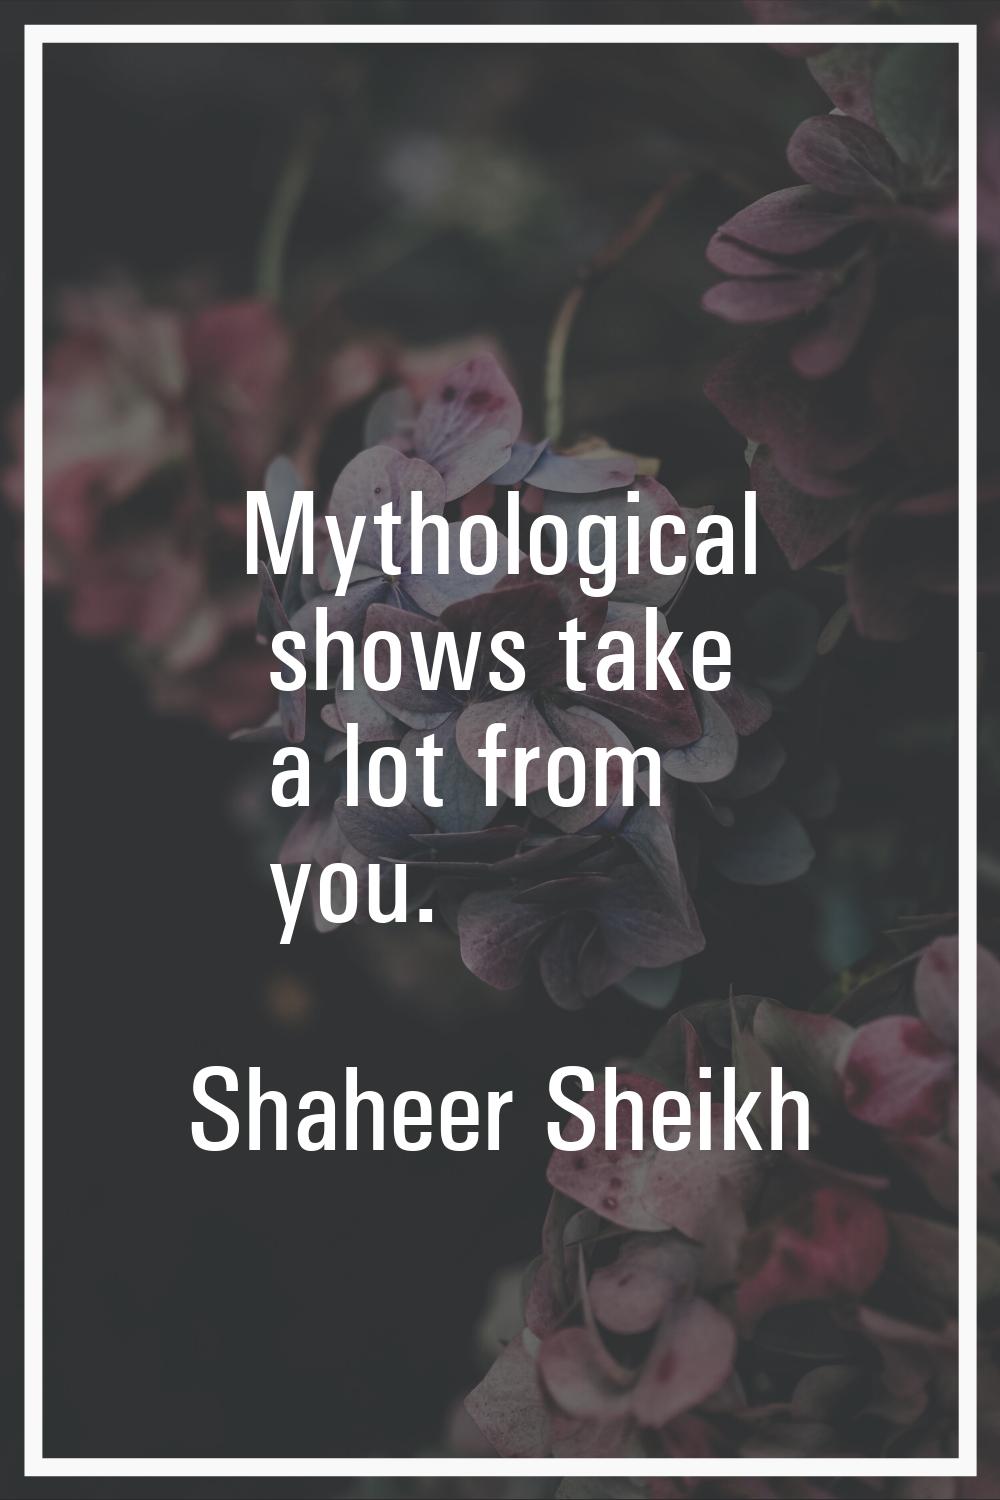 Mythological shows take a lot from you.